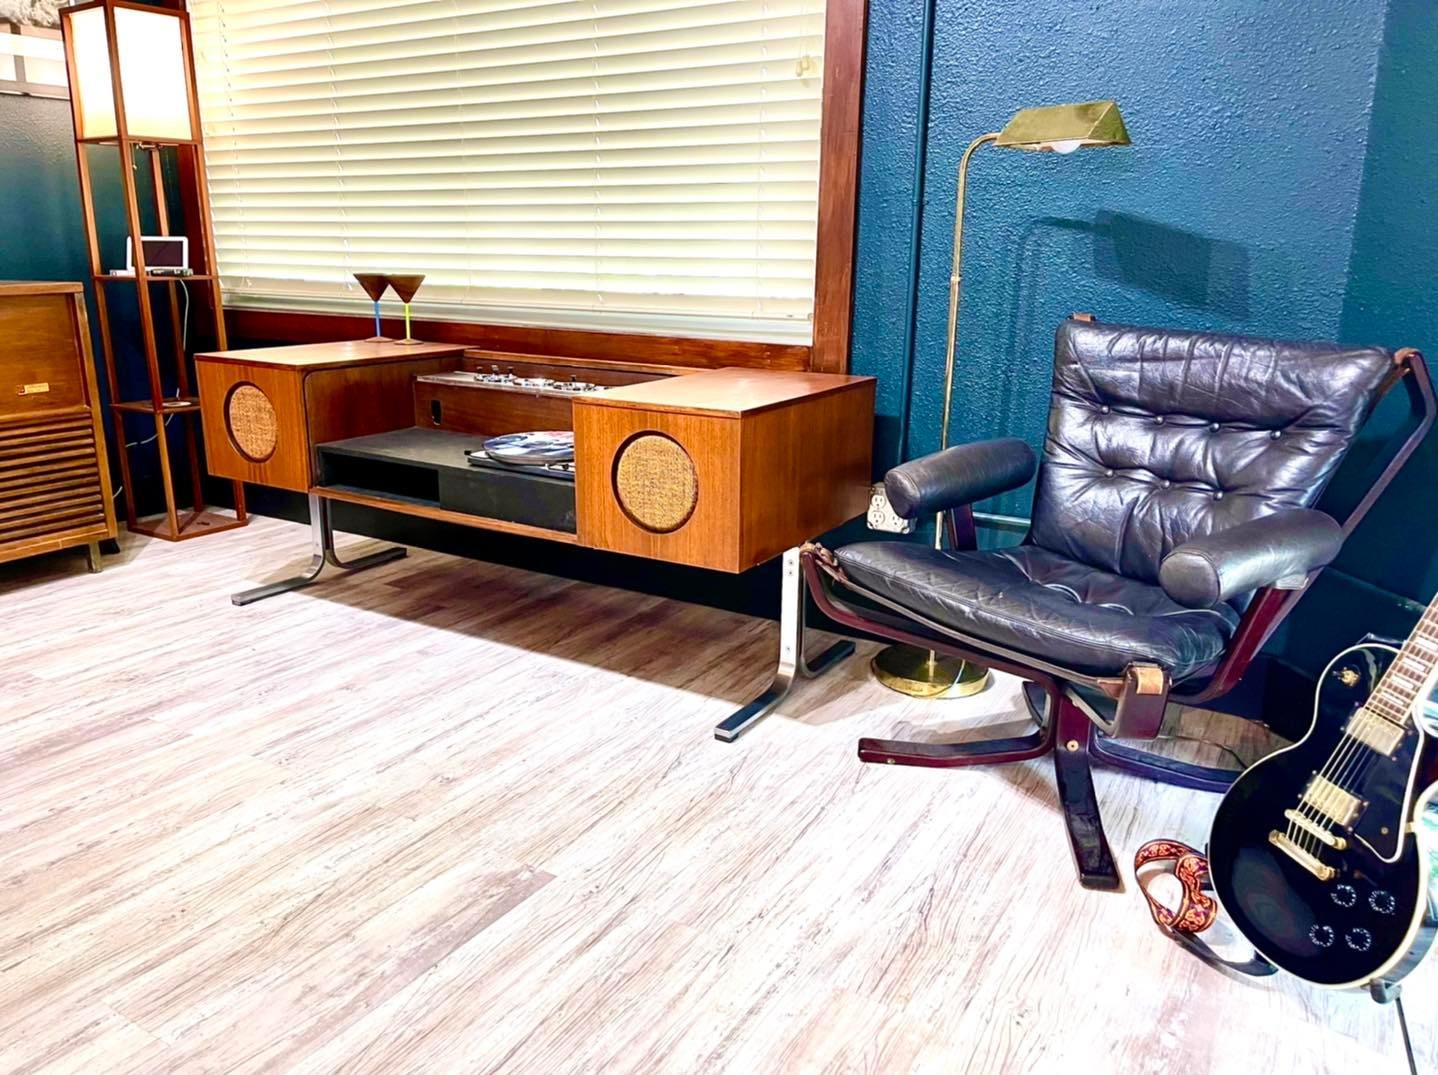 Woodwork Electrohome 701 Circa 75 stereo console radio record player (eames baughman lk) For Sale